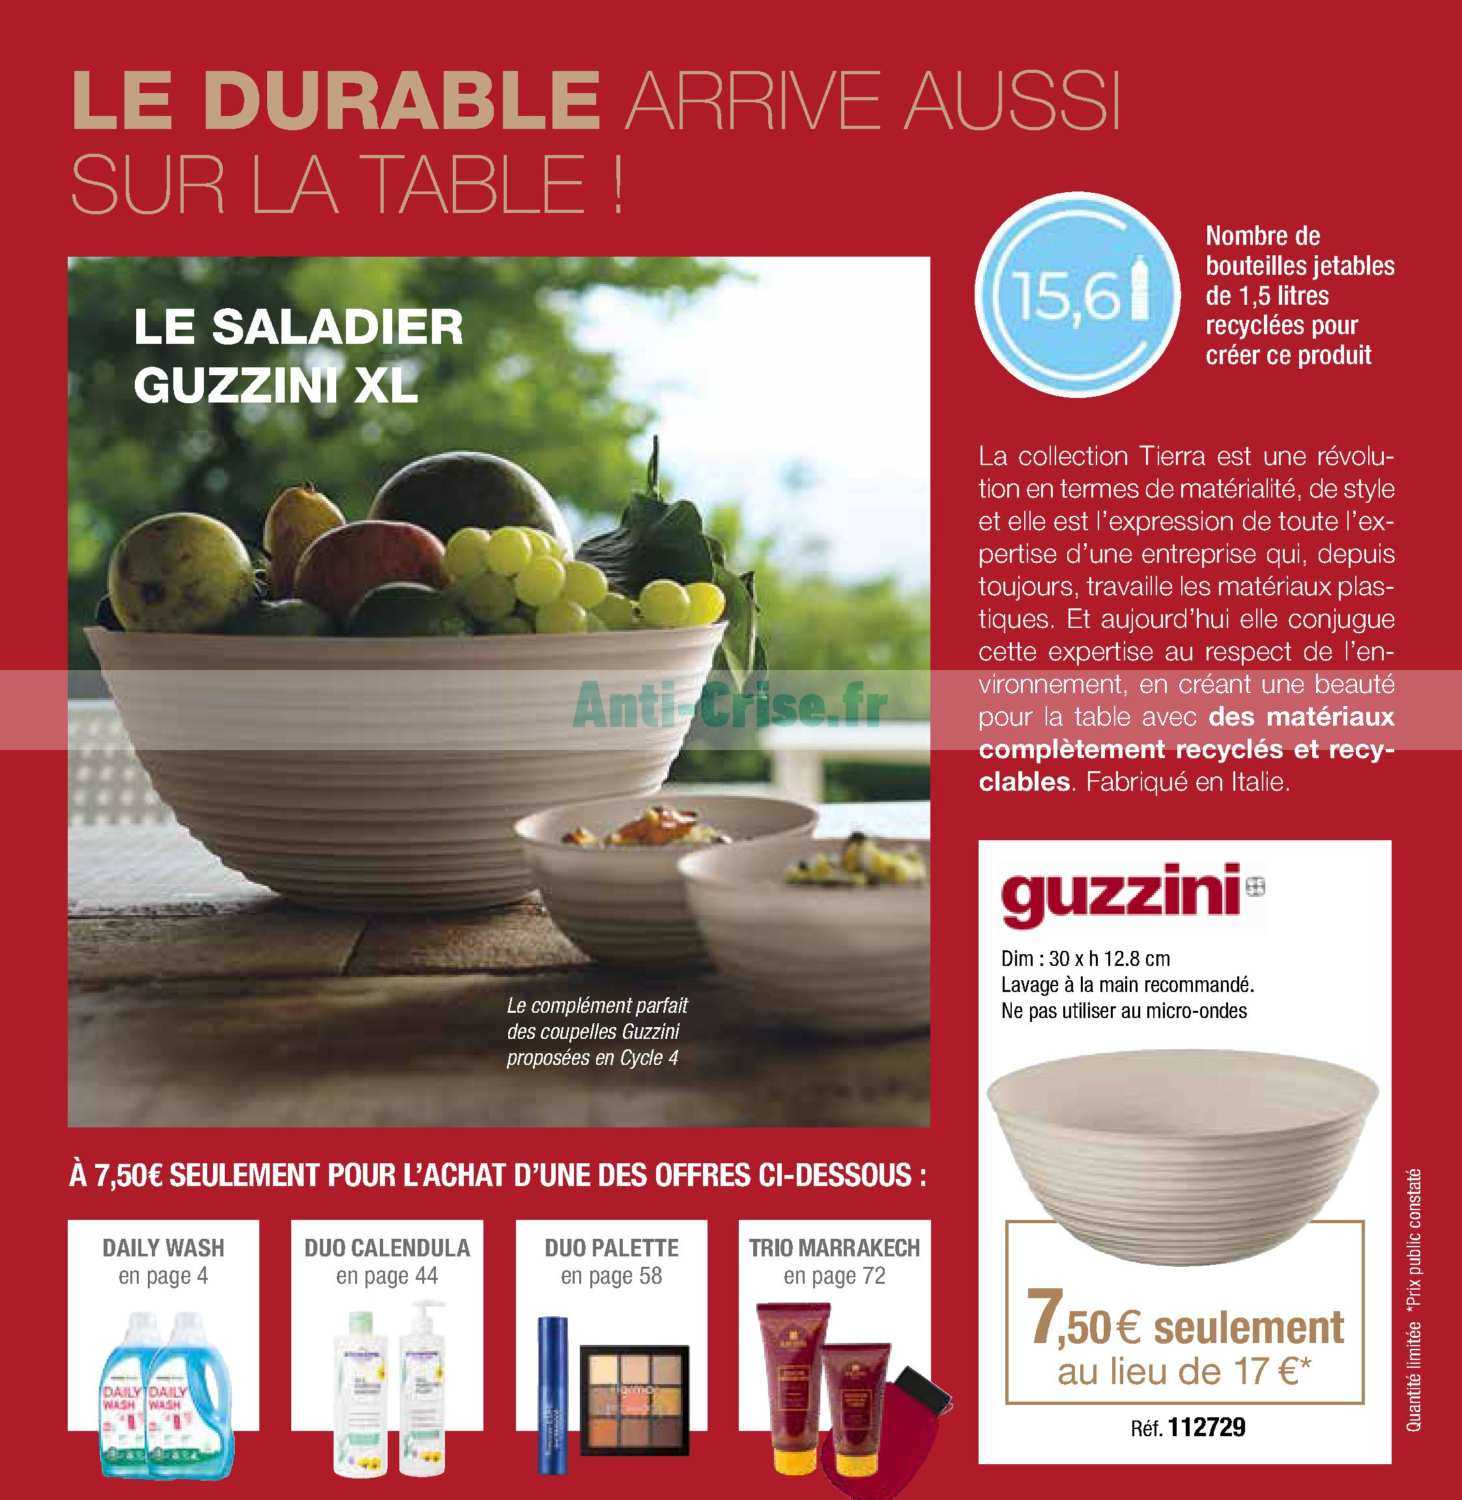 Catalogue produits Stanhome by Michel Marie - Issuu